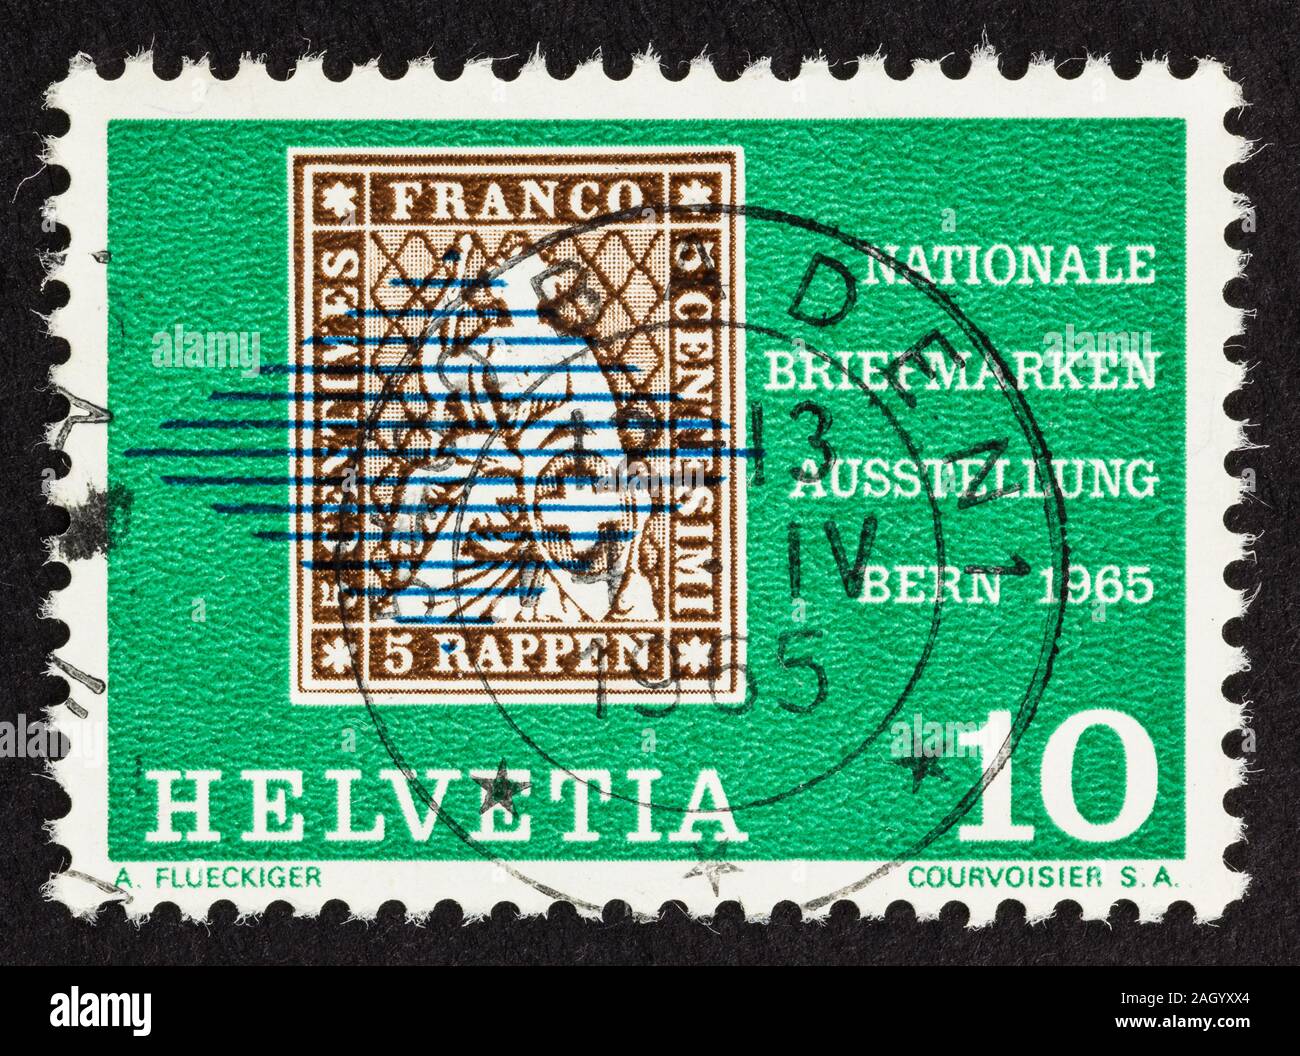 Close up of green Swiss Stamp featuring an historic 5 rappen stamp on a 10 centime stamp issued in 1965. Sc# 463 Stock Photo